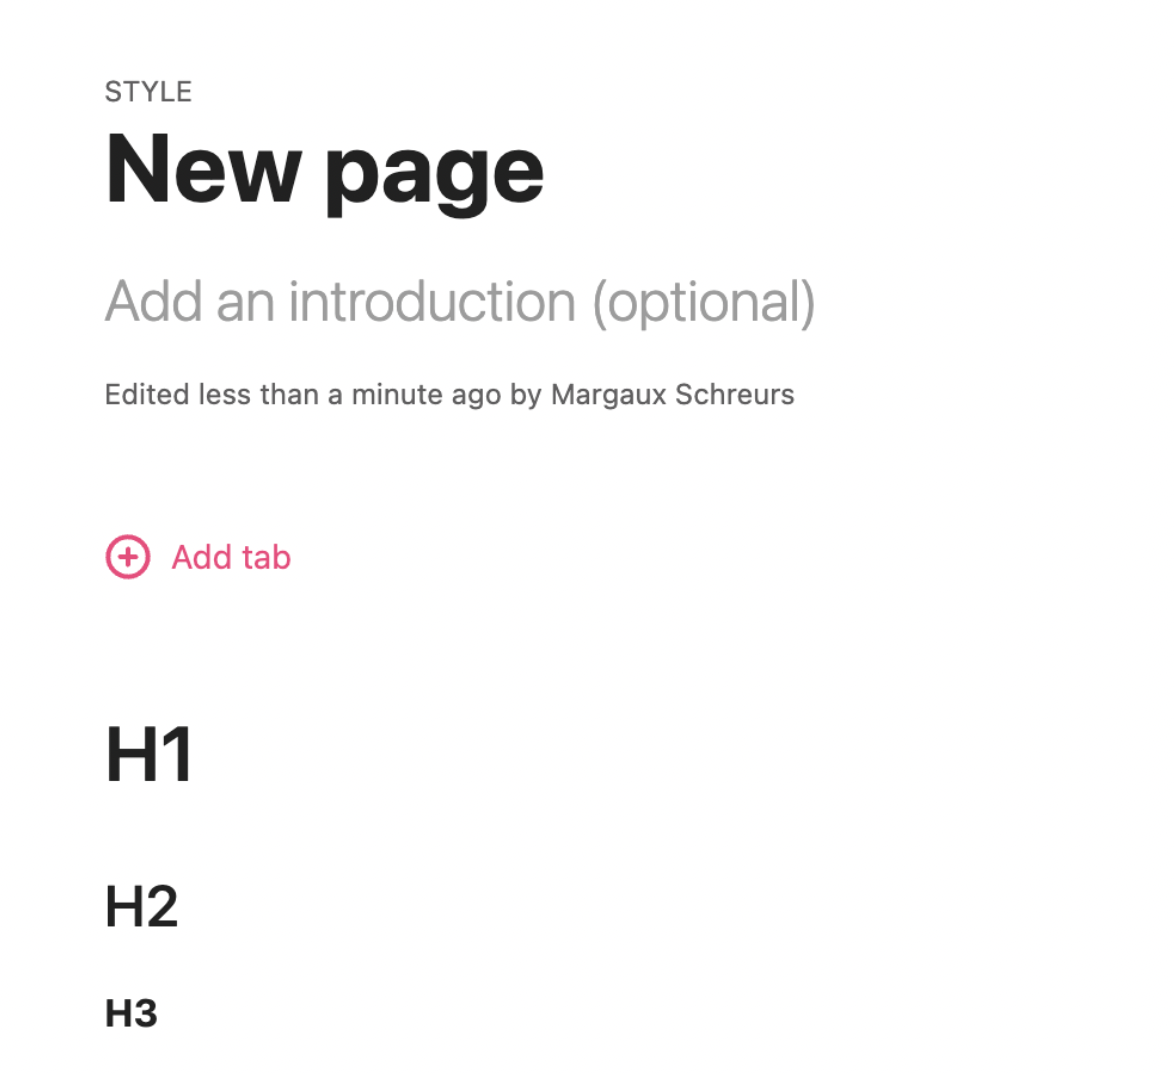 Styleguide page with the differnt header options